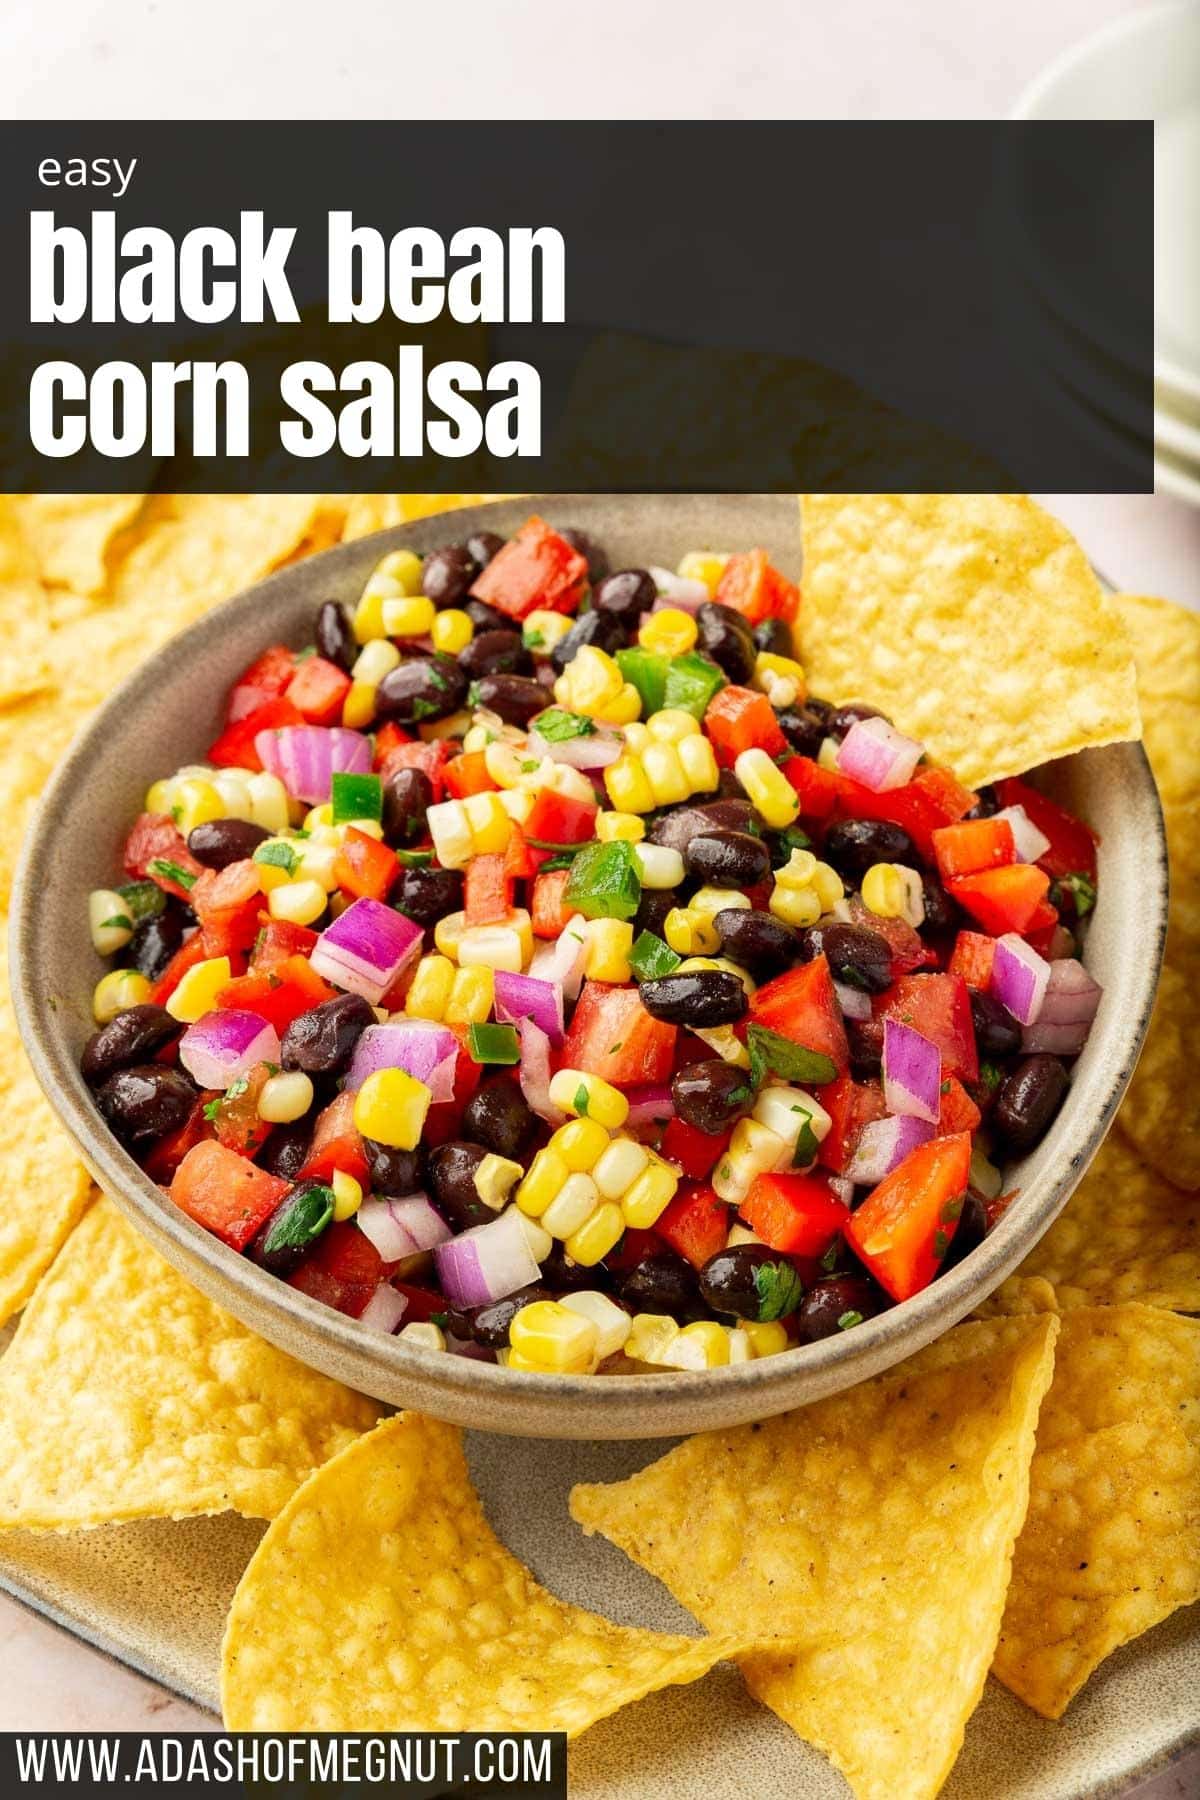 A bowl of a corn salsa with black beans and tomatoes on a platter of tortilla chips.